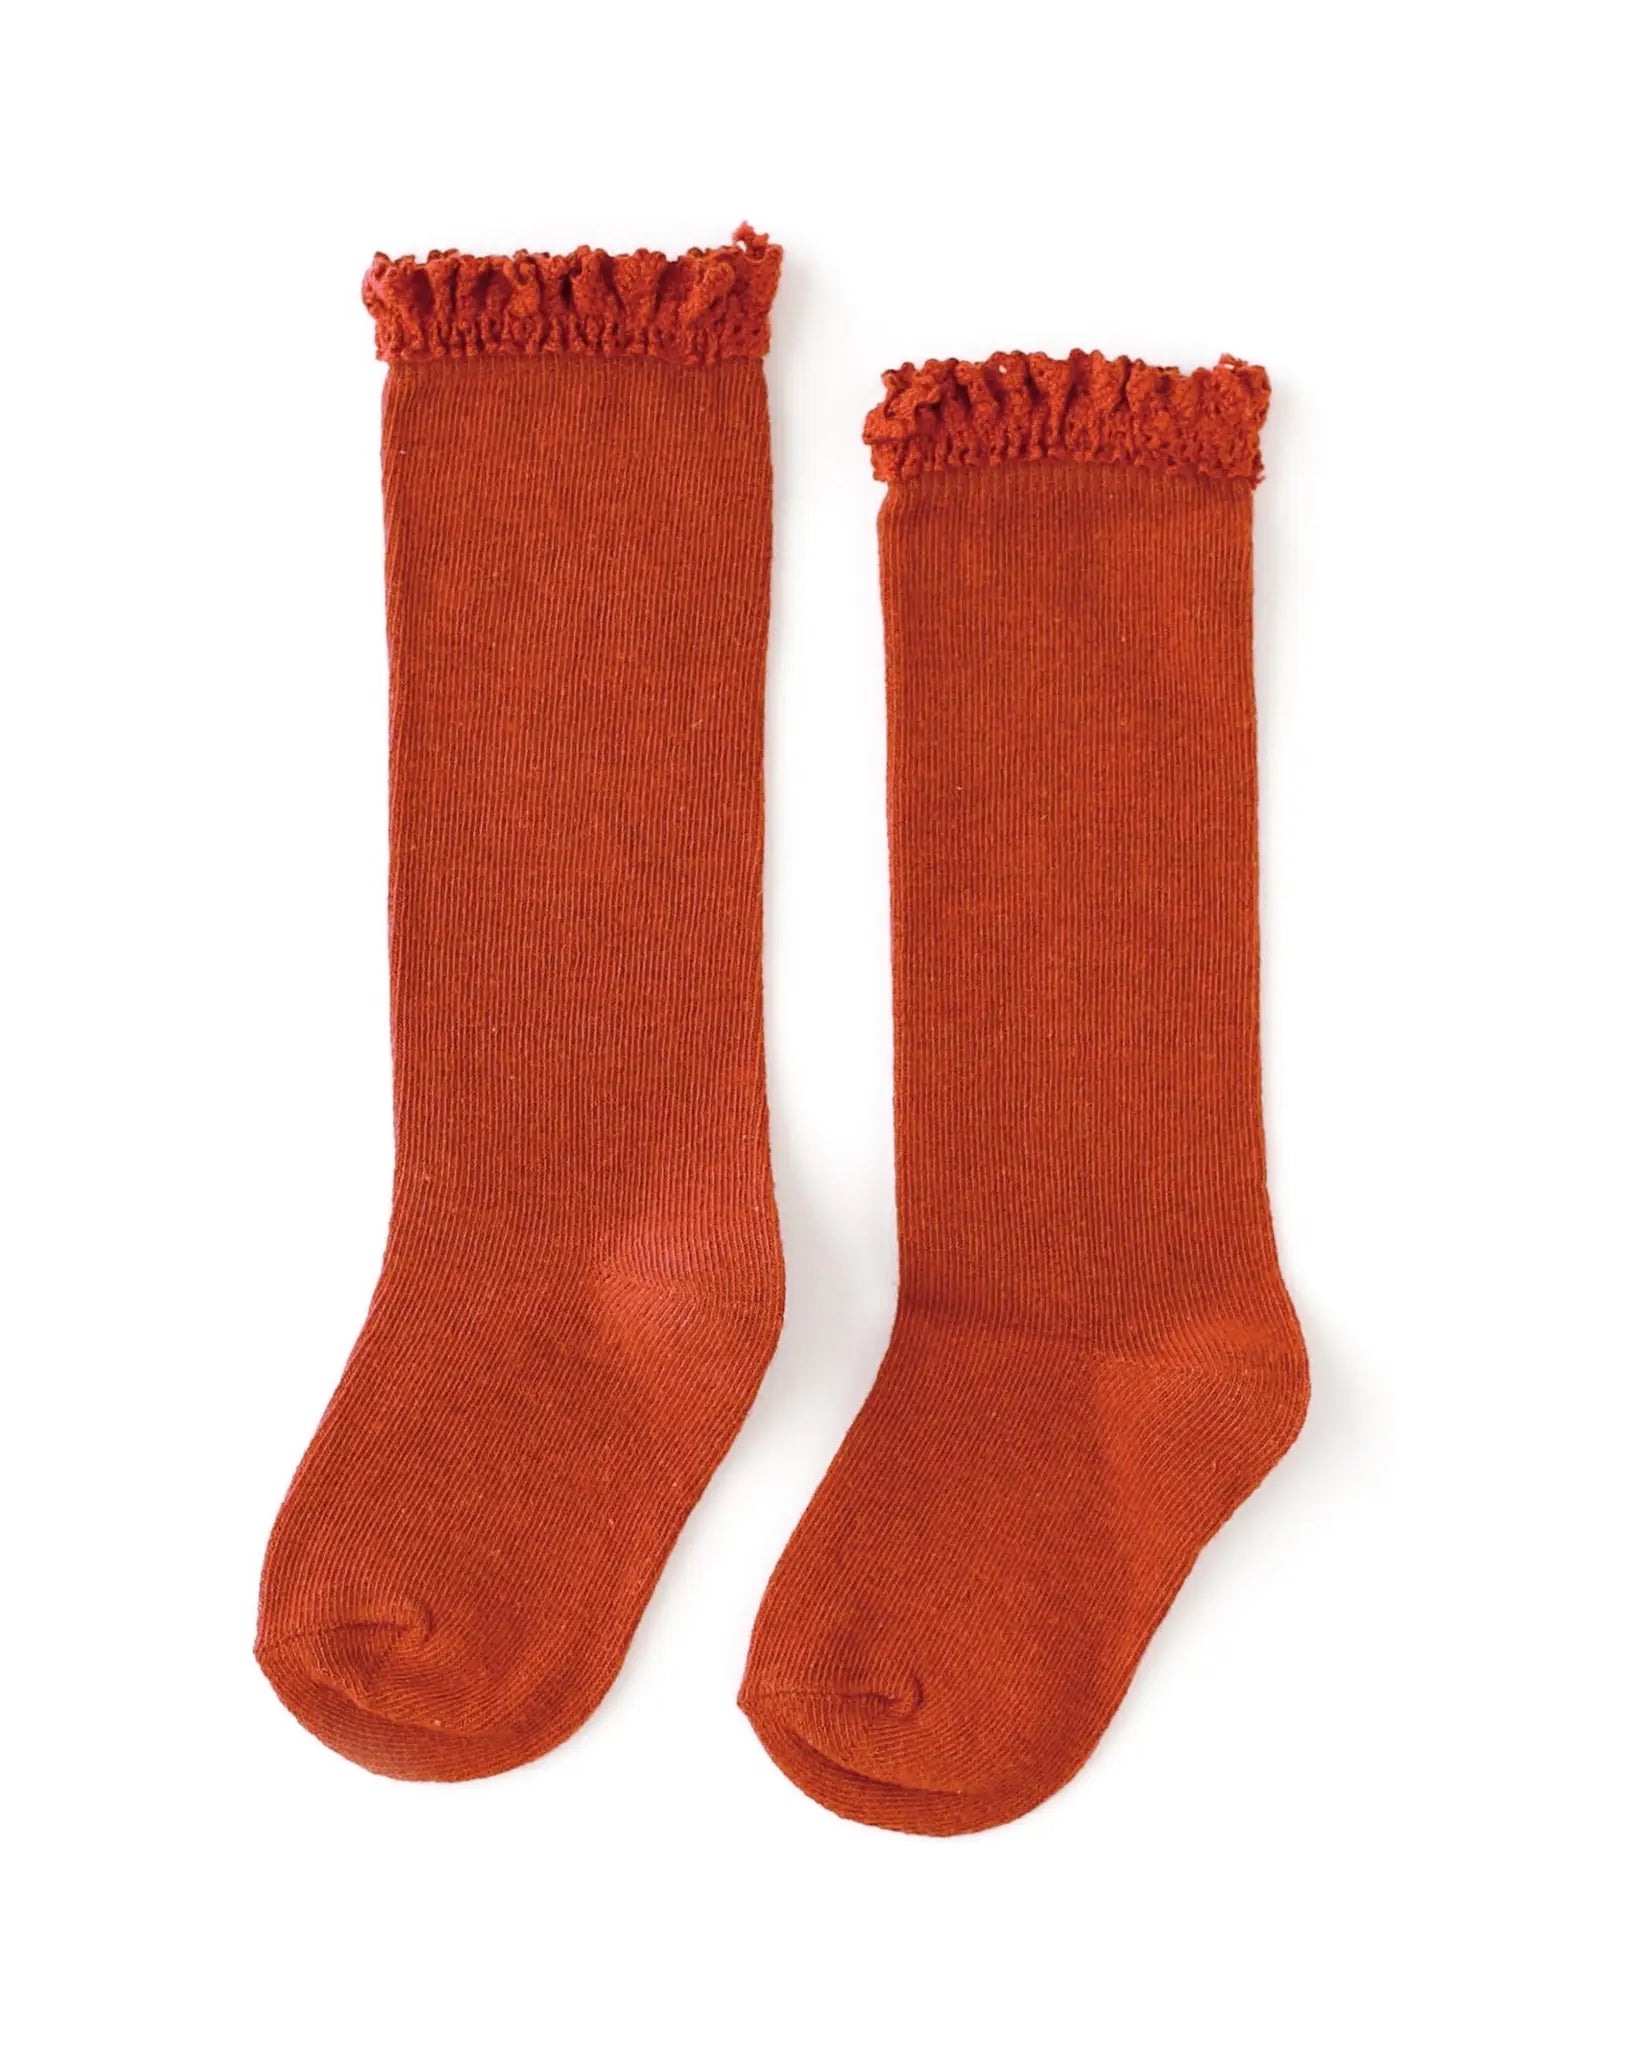 Persimmon Lace Top Knee High Socks  A Touch of Magnolia Boutique   